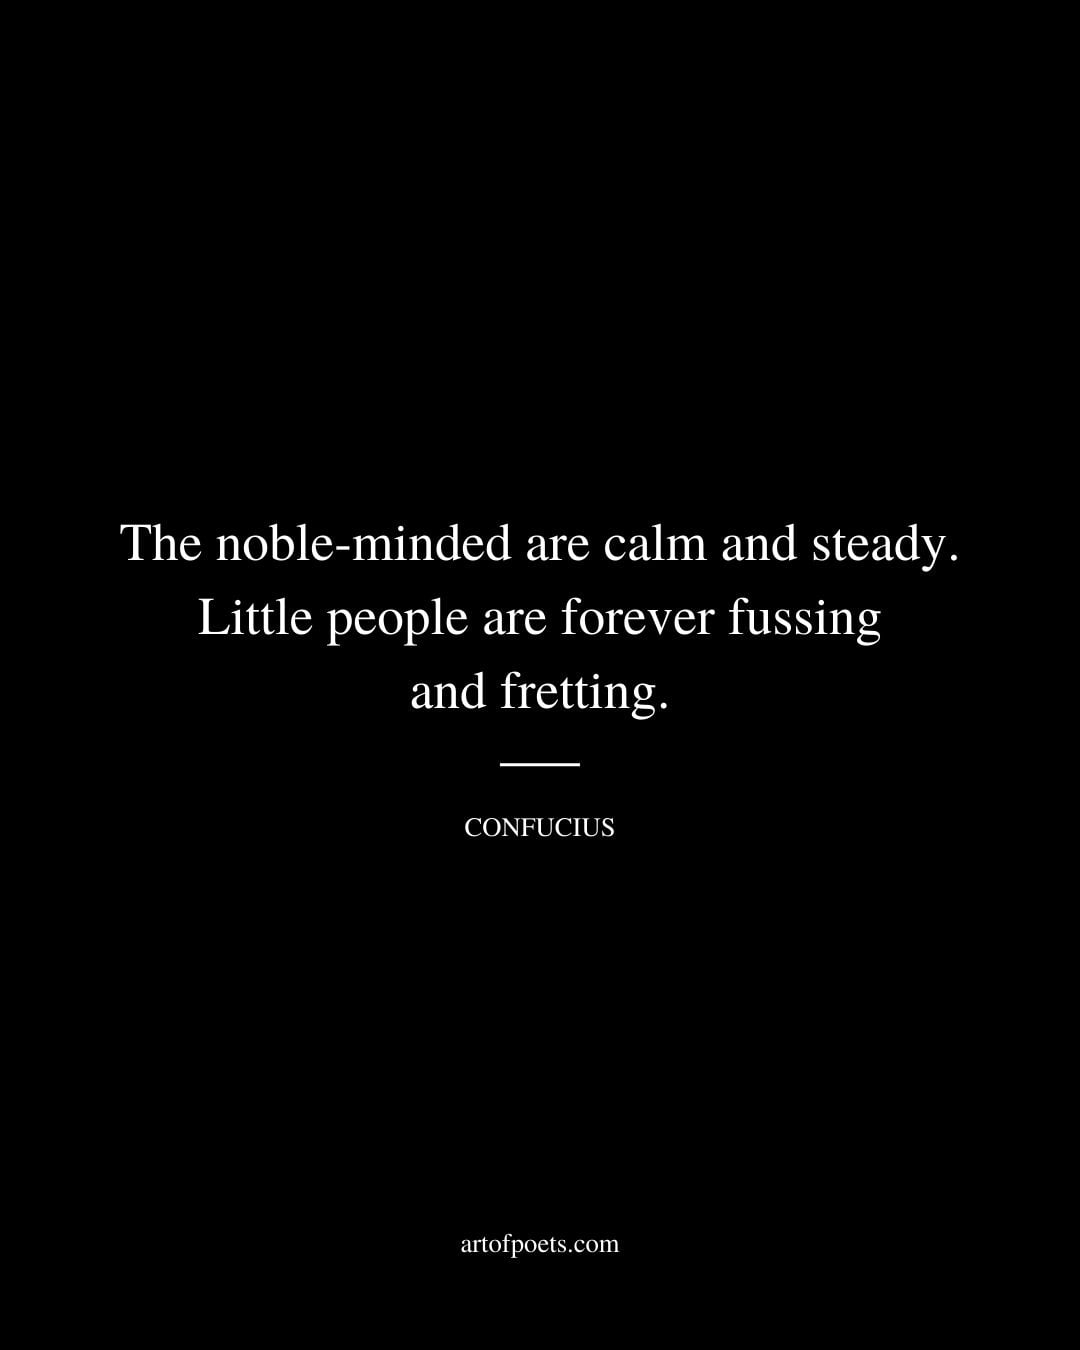 The noble minded are calm and steady. Little people are forever fussing and fretting